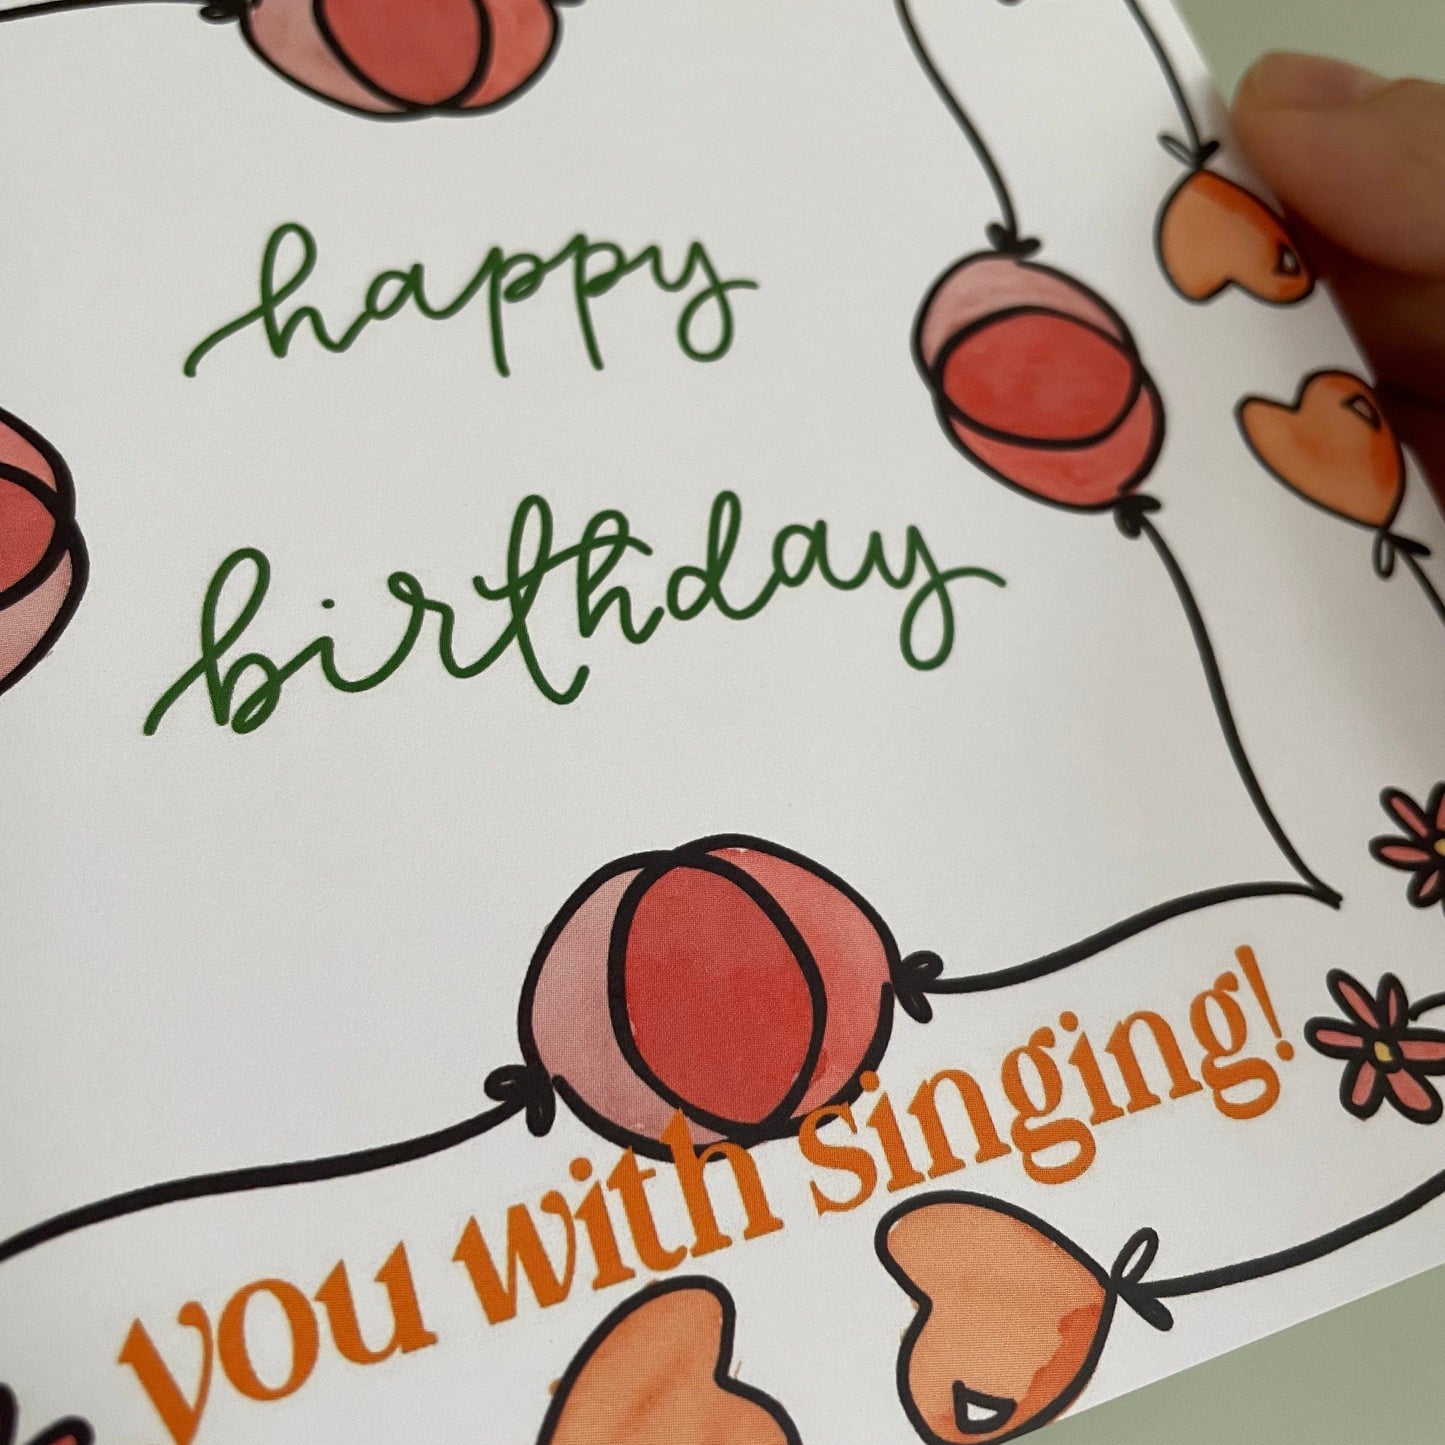 Christian birthday card - He rejoices over you with singing And Hope Designs Cards